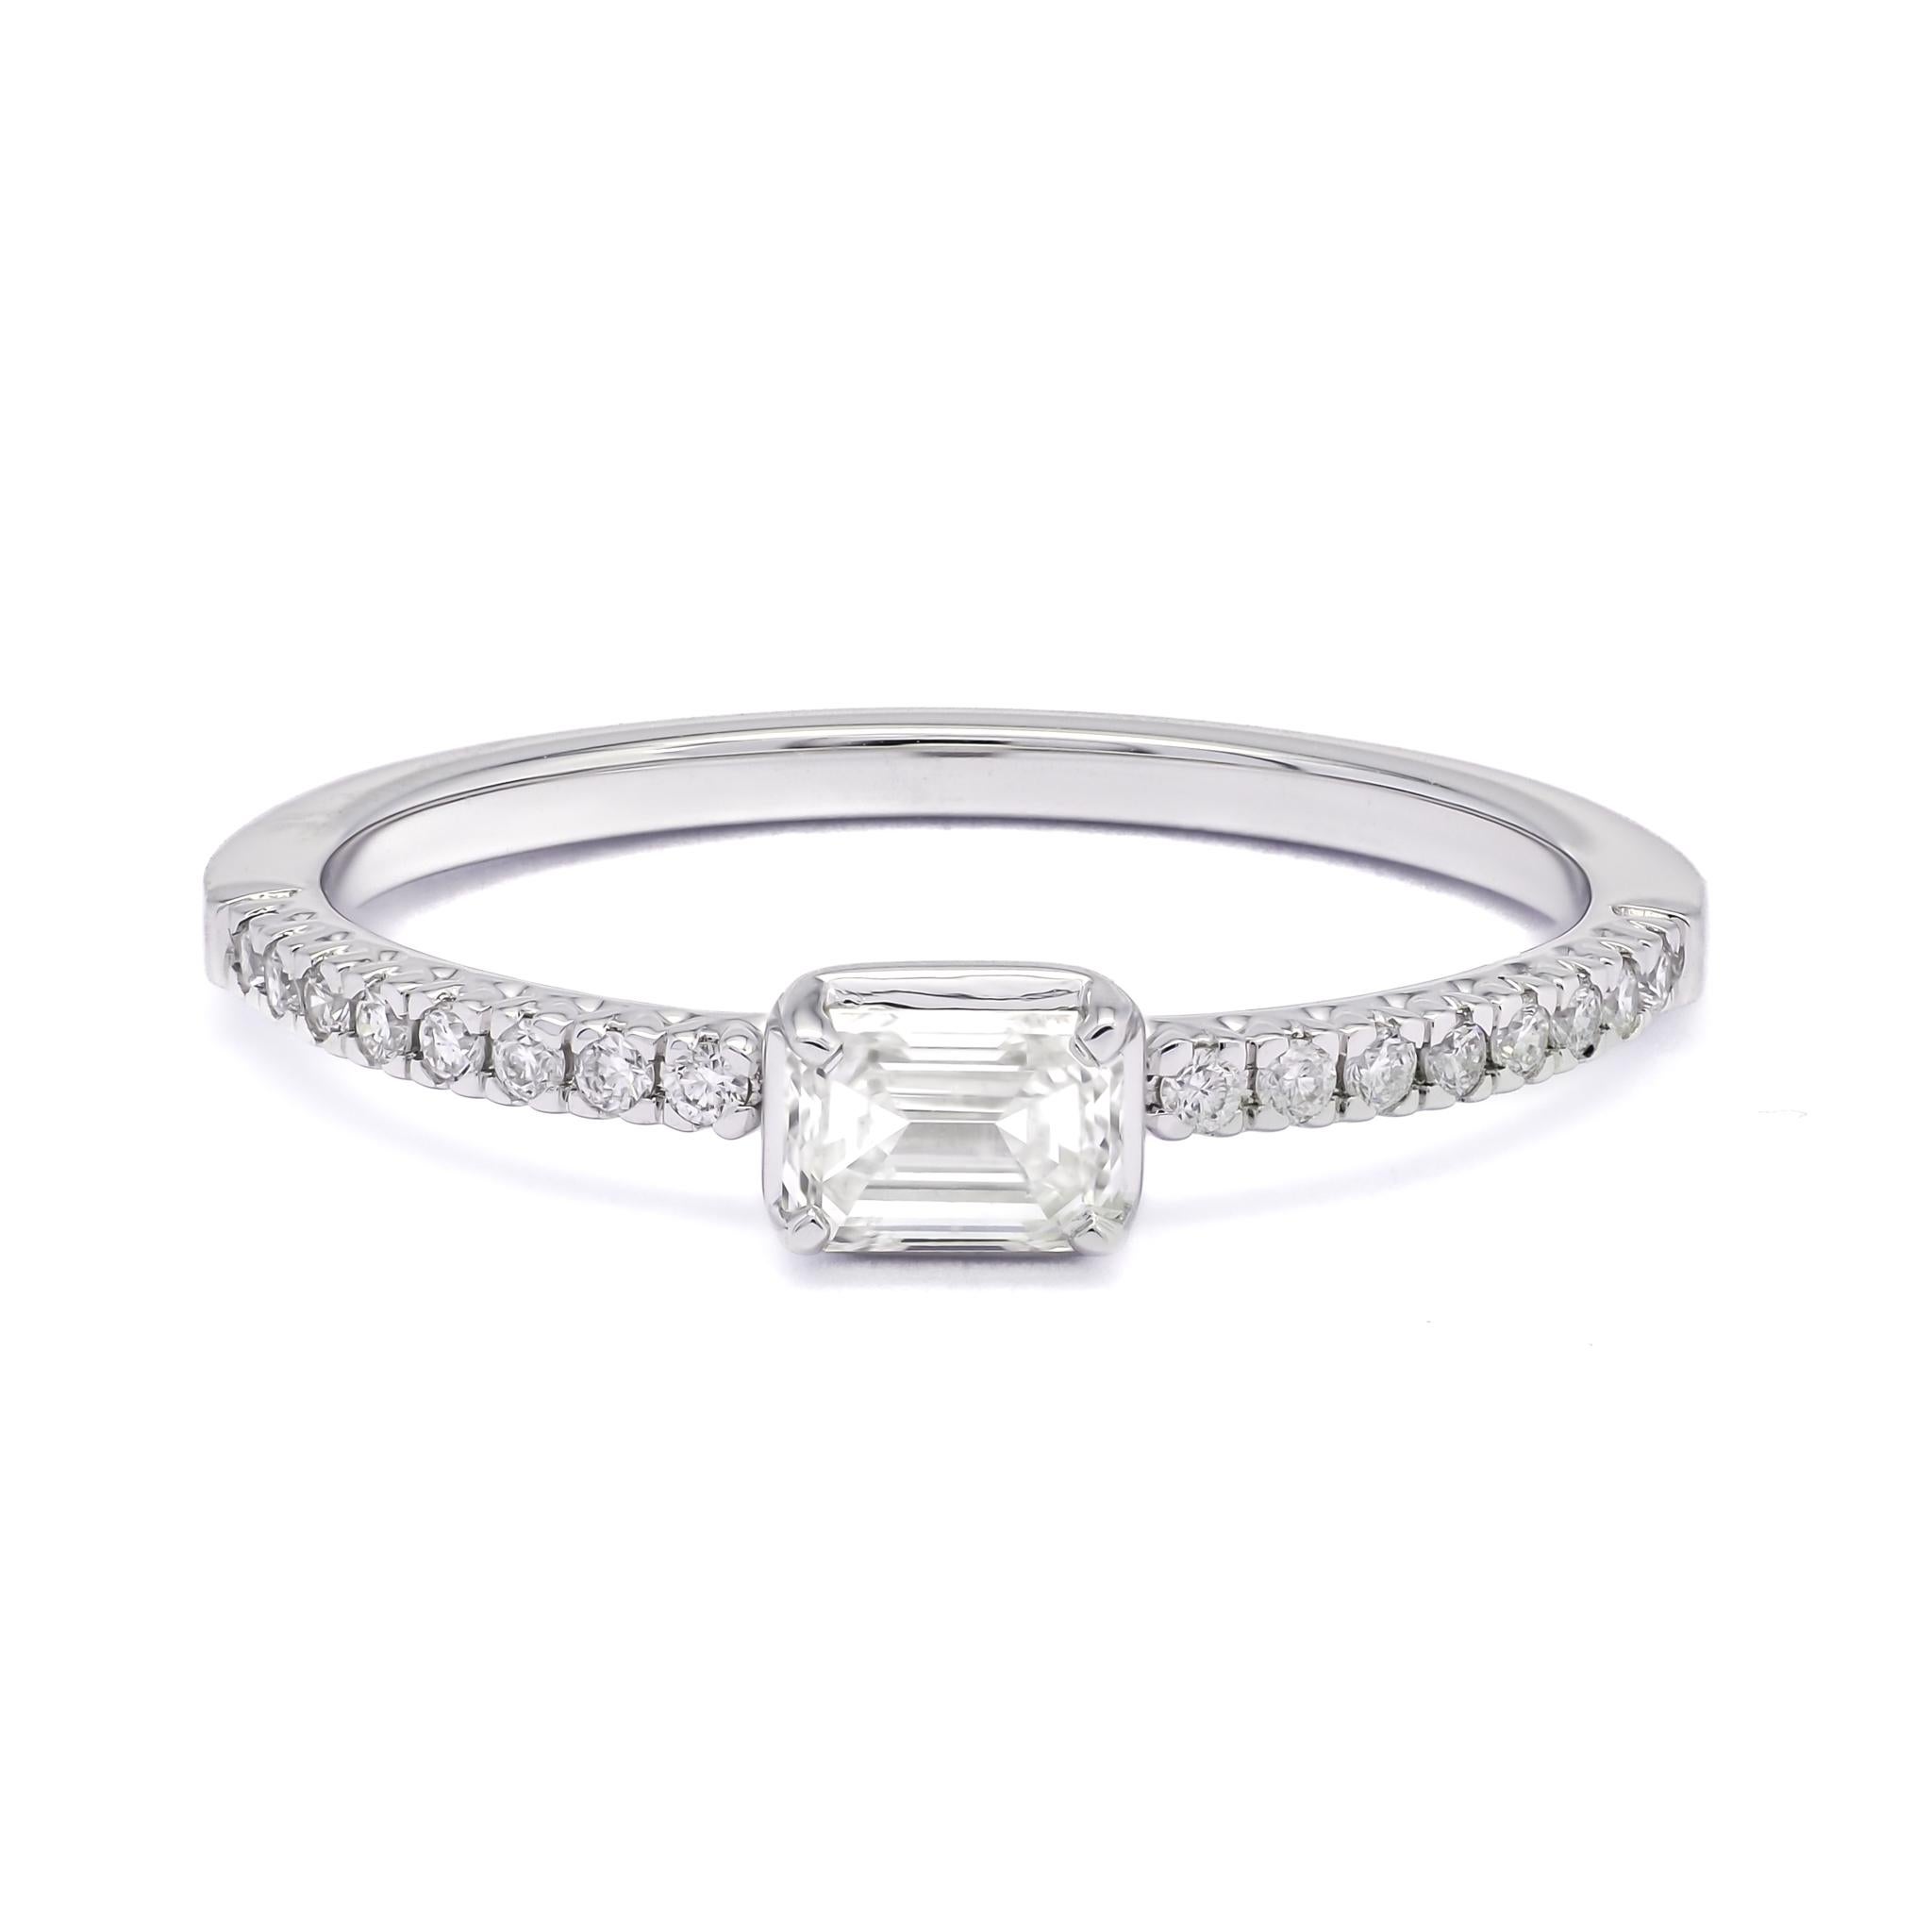 Embodying celestial elegance, this exquisite Emerald Cut Solitaire Ring in 18K White Gold boasts a mesmerizing 0.25 carat Emerald, capturing the essence of timeless sophistication. Crafted with utmost precision and skill, the enchanting Emerald